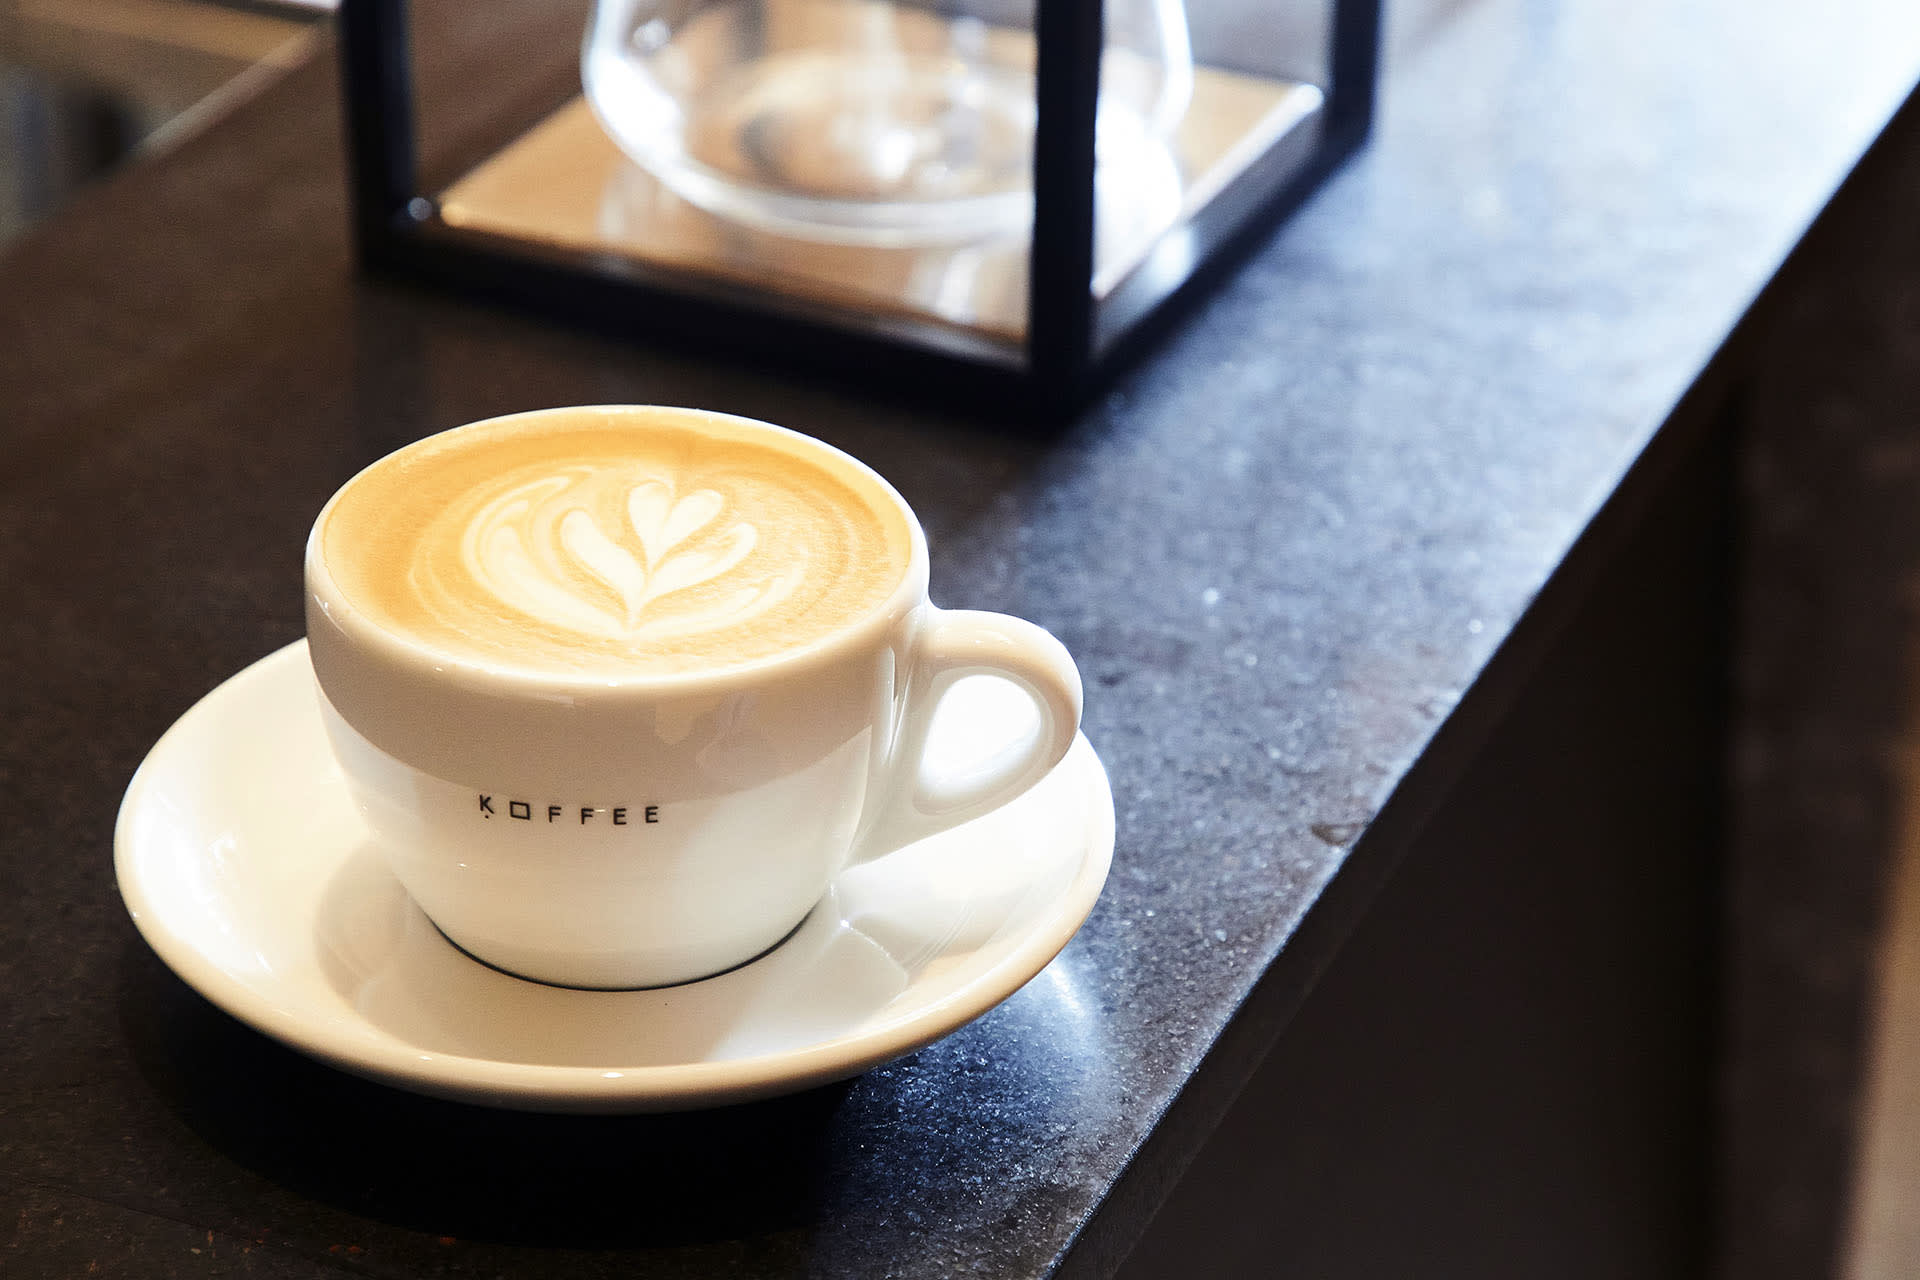 Omotesando Koffee Singapore — Worth The Hype Or Not?